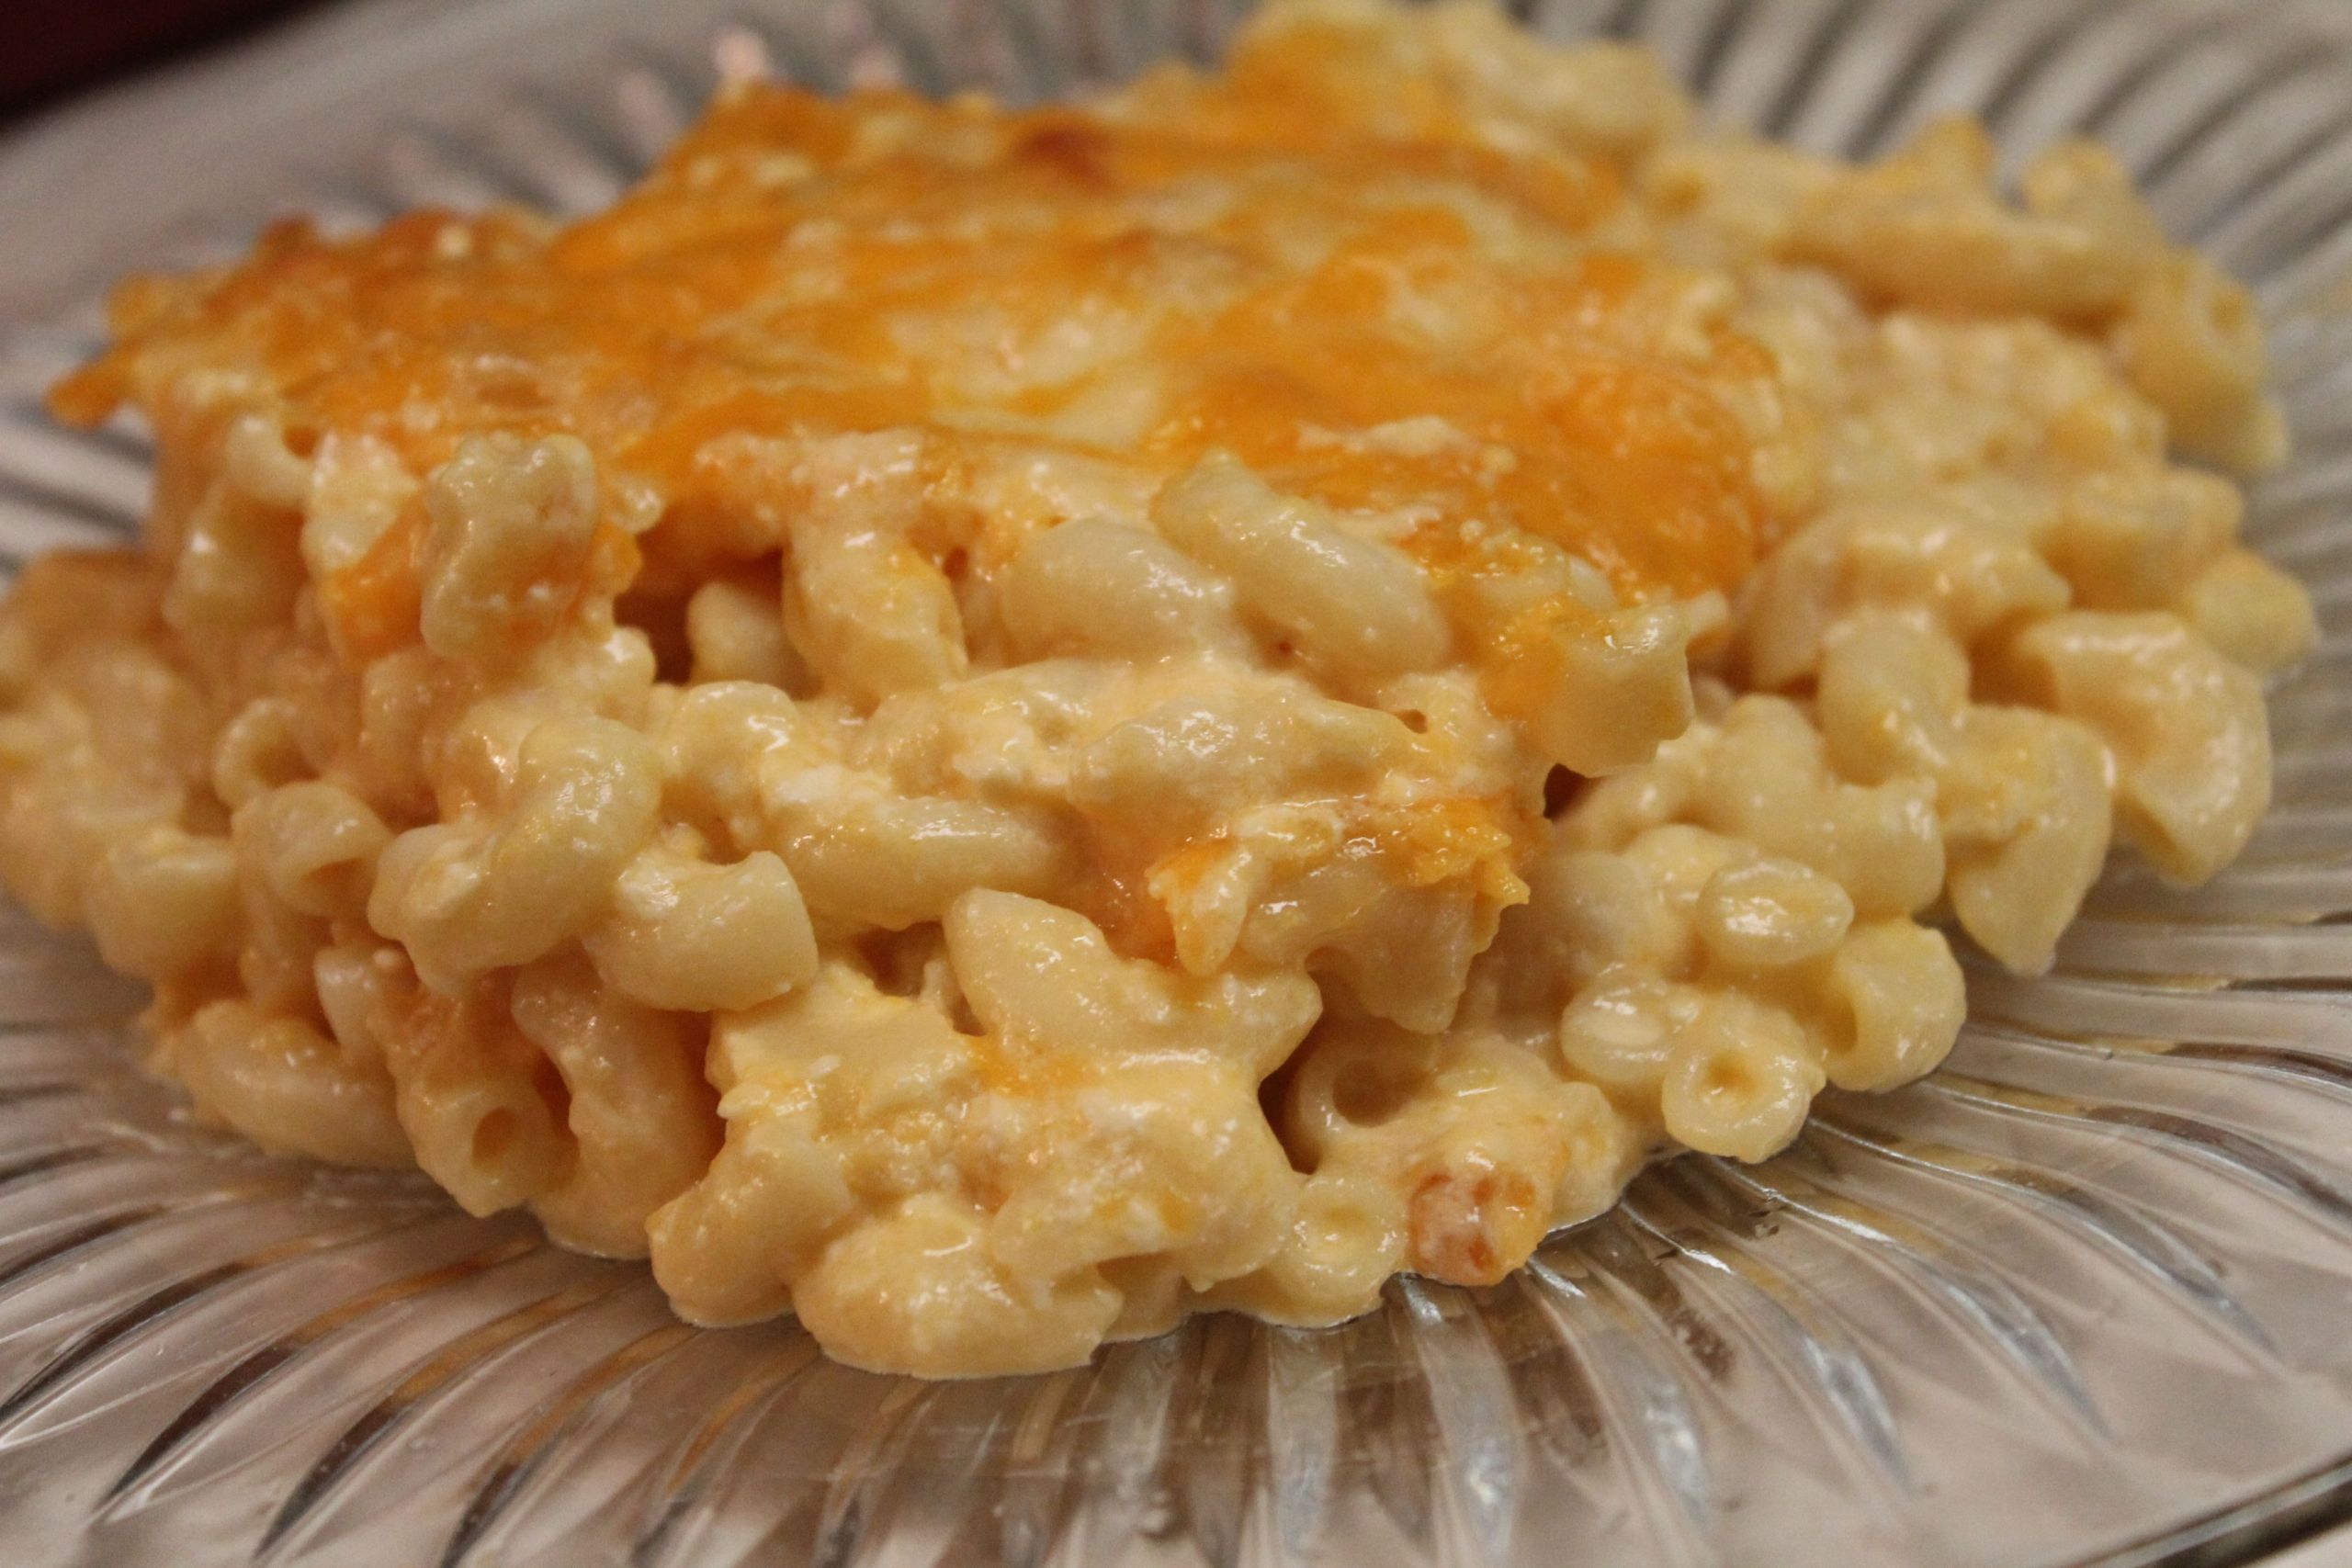 baked macaroni and cheese recipes with eggs